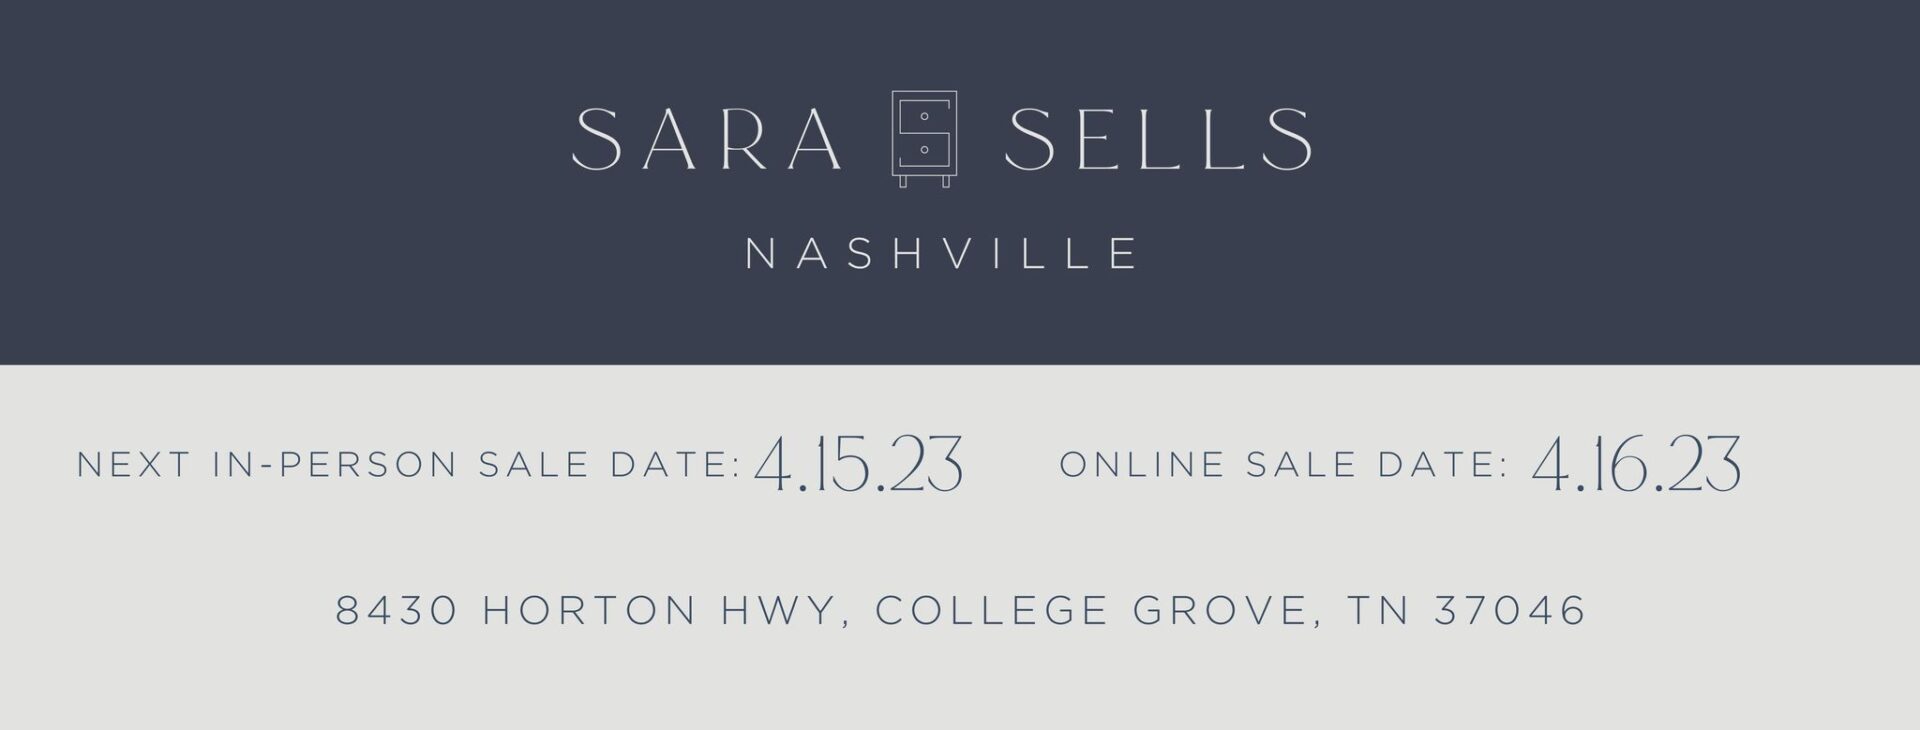 Nashville Shopping Event_Sara Sells is an exciting monthly shopping experience offering new, high-quality furniture & home decor up to 60% off retail!